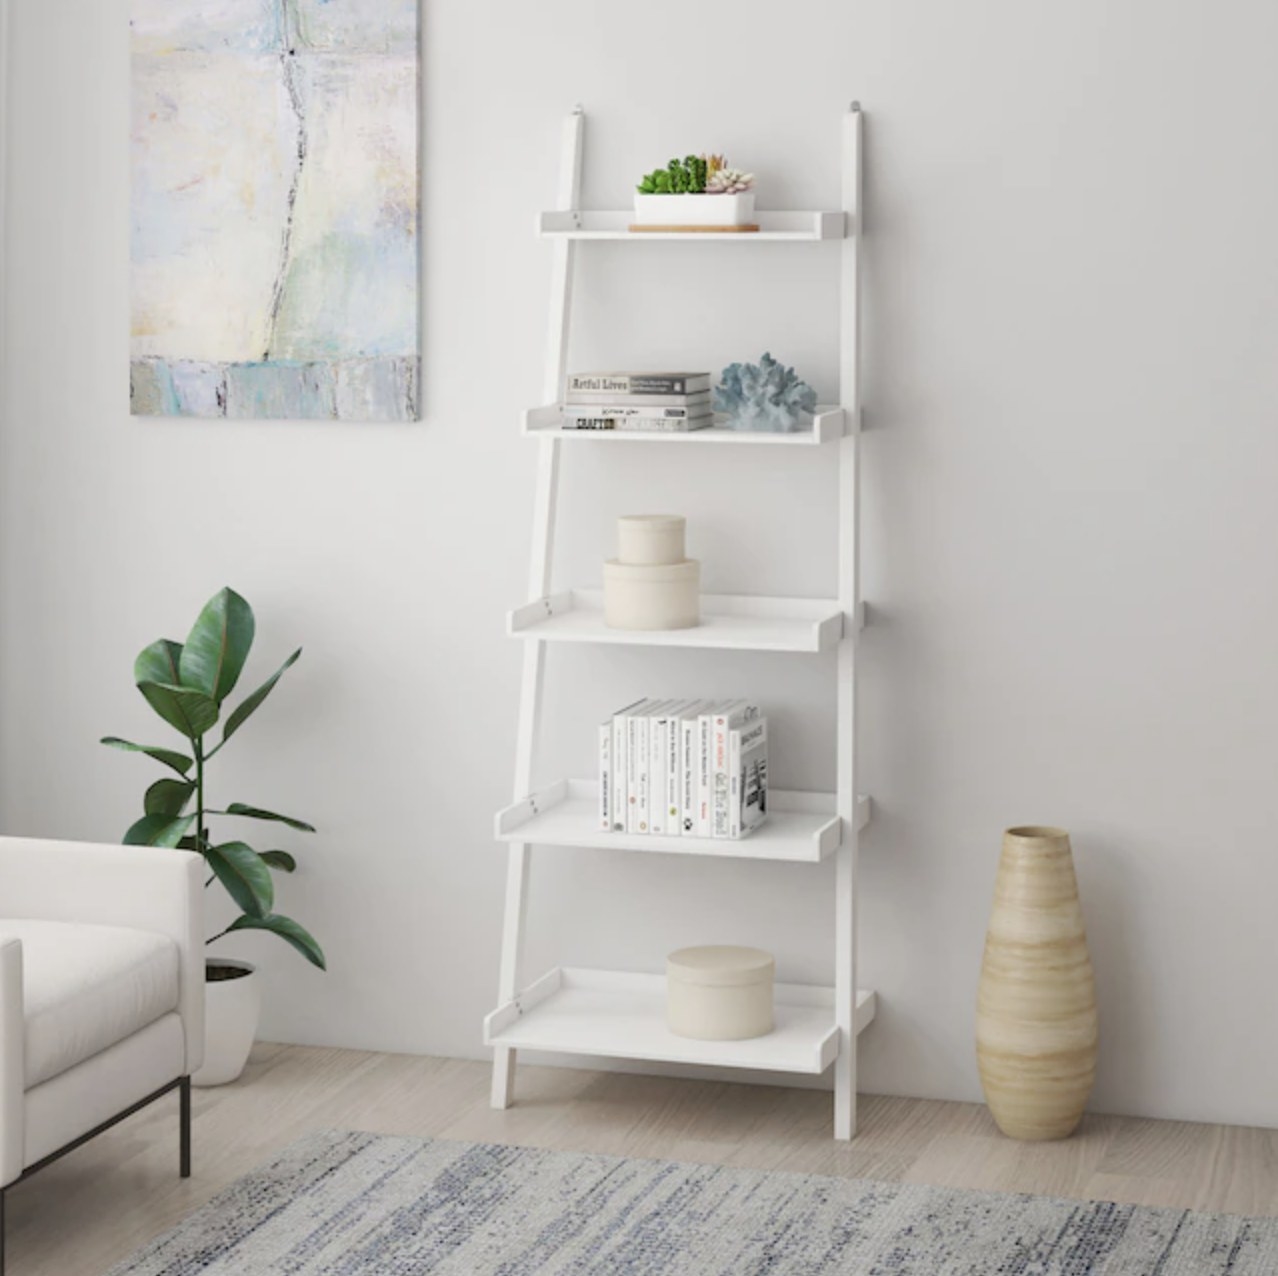 The white five-tier shelf holding various objects